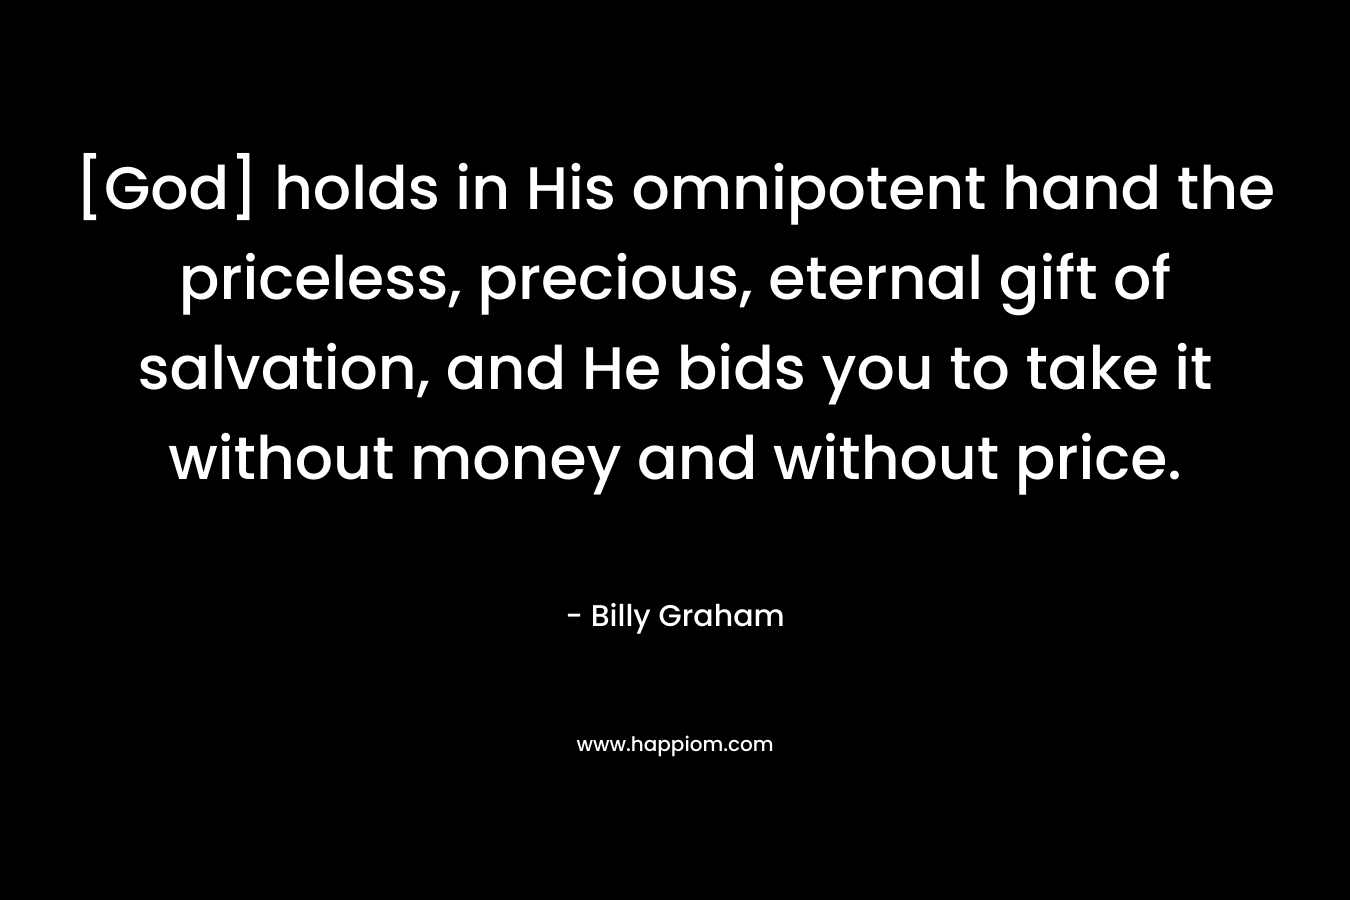 [God] holds in His omnipotent hand the priceless, precious, eternal gift of salvation, and He bids you to take it without money and without price.